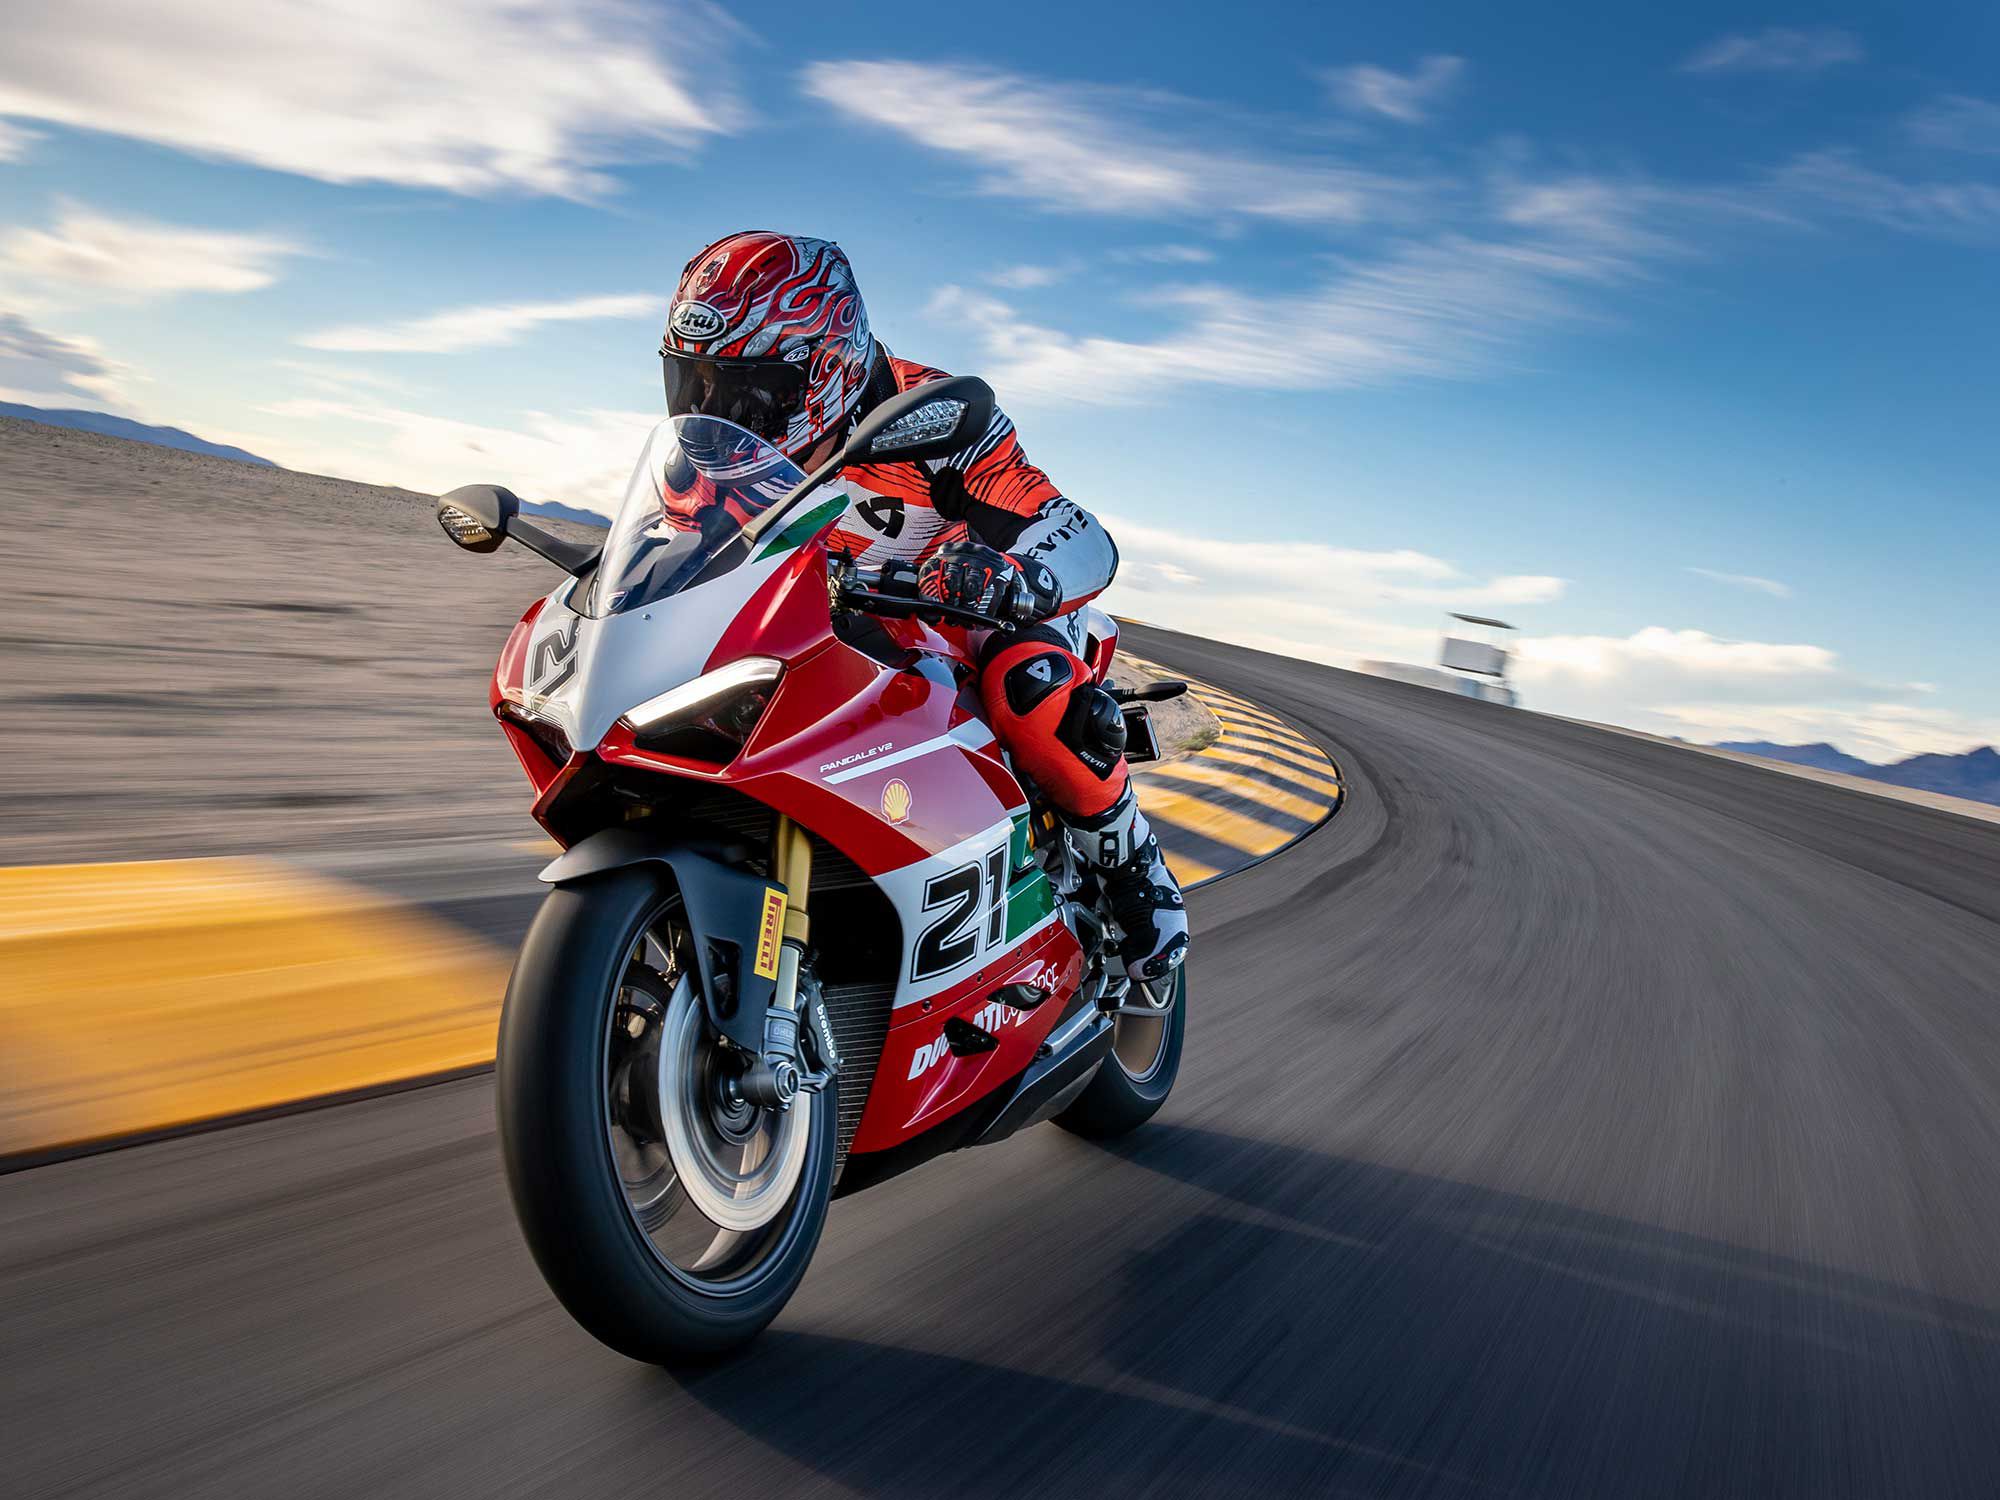 The Panigale V2 Bayliss 1st Championship 20th Anniversary Edition looks, and feels, at home on a racetrack.